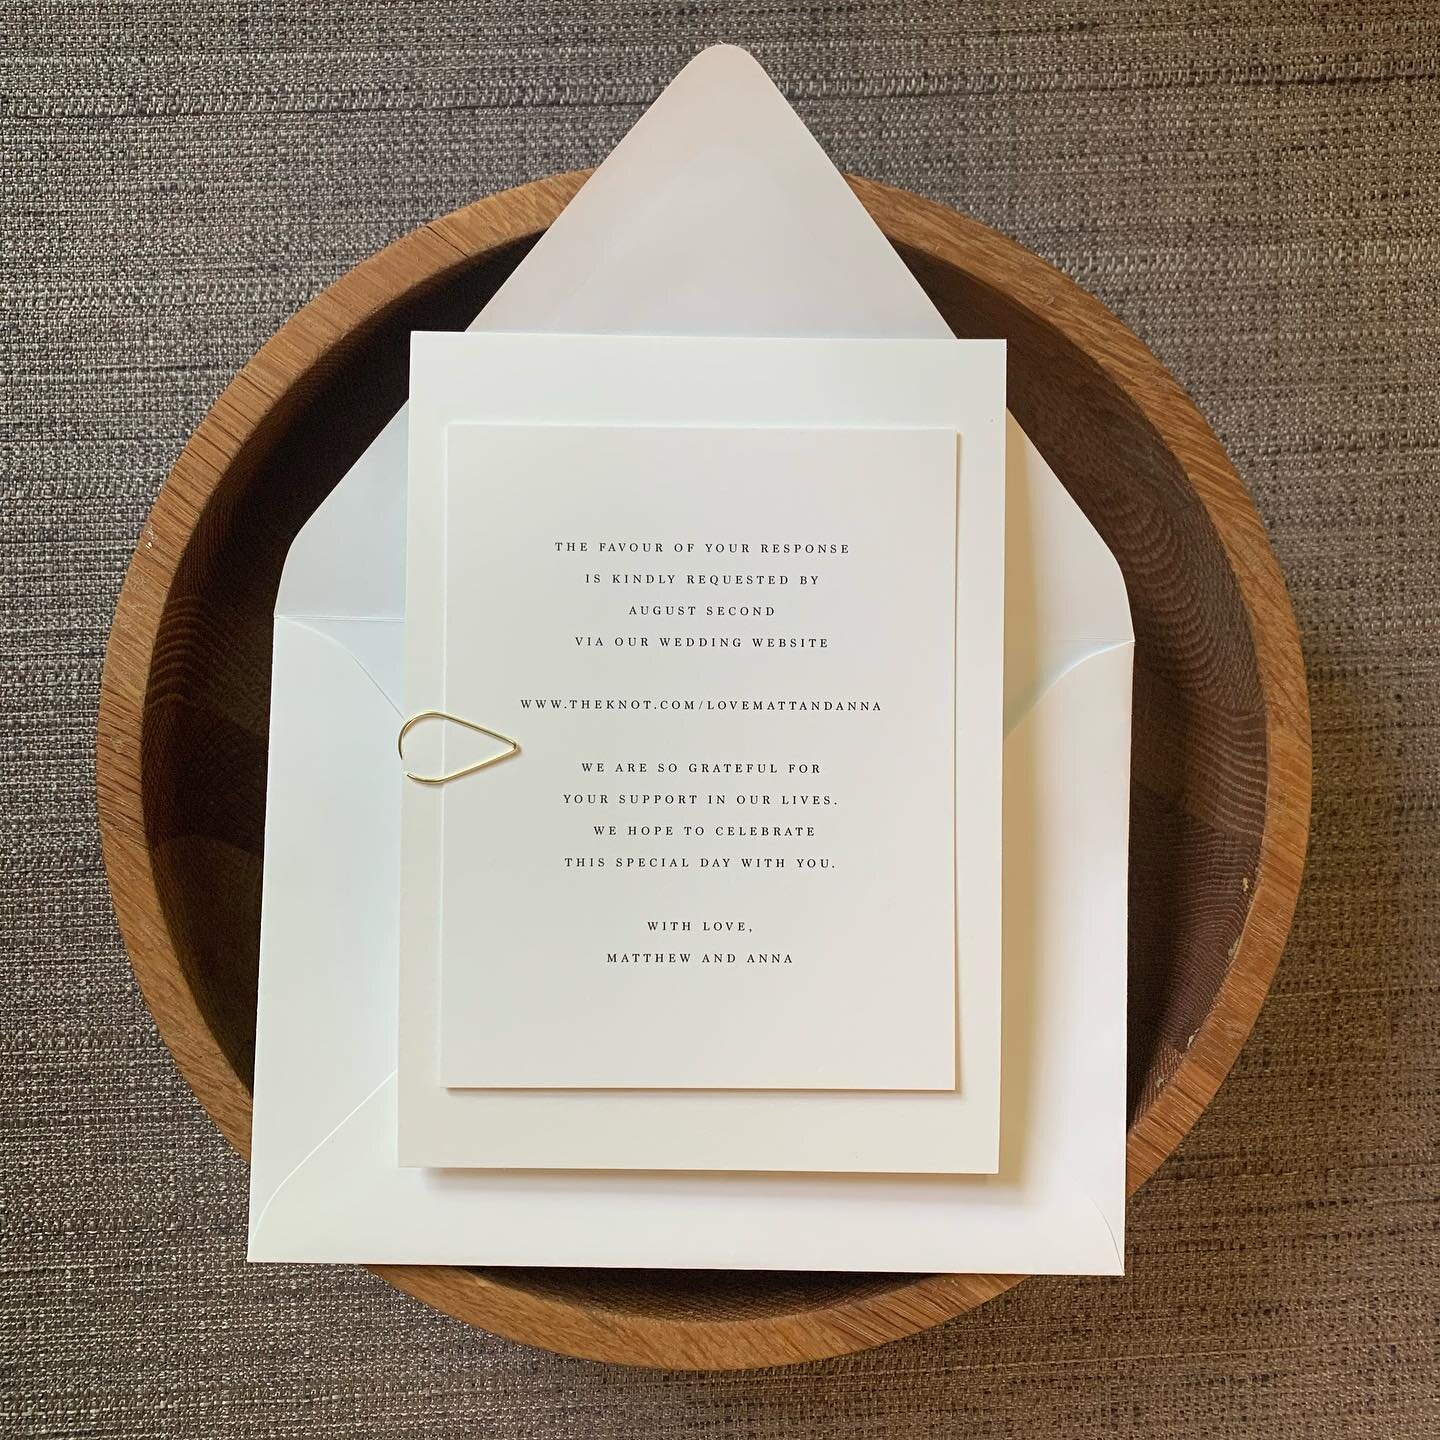 I love it when a couple wants to include a personal note to their guests in the details card. It really sets an intimate/ personalized tone for the entire wedding day.